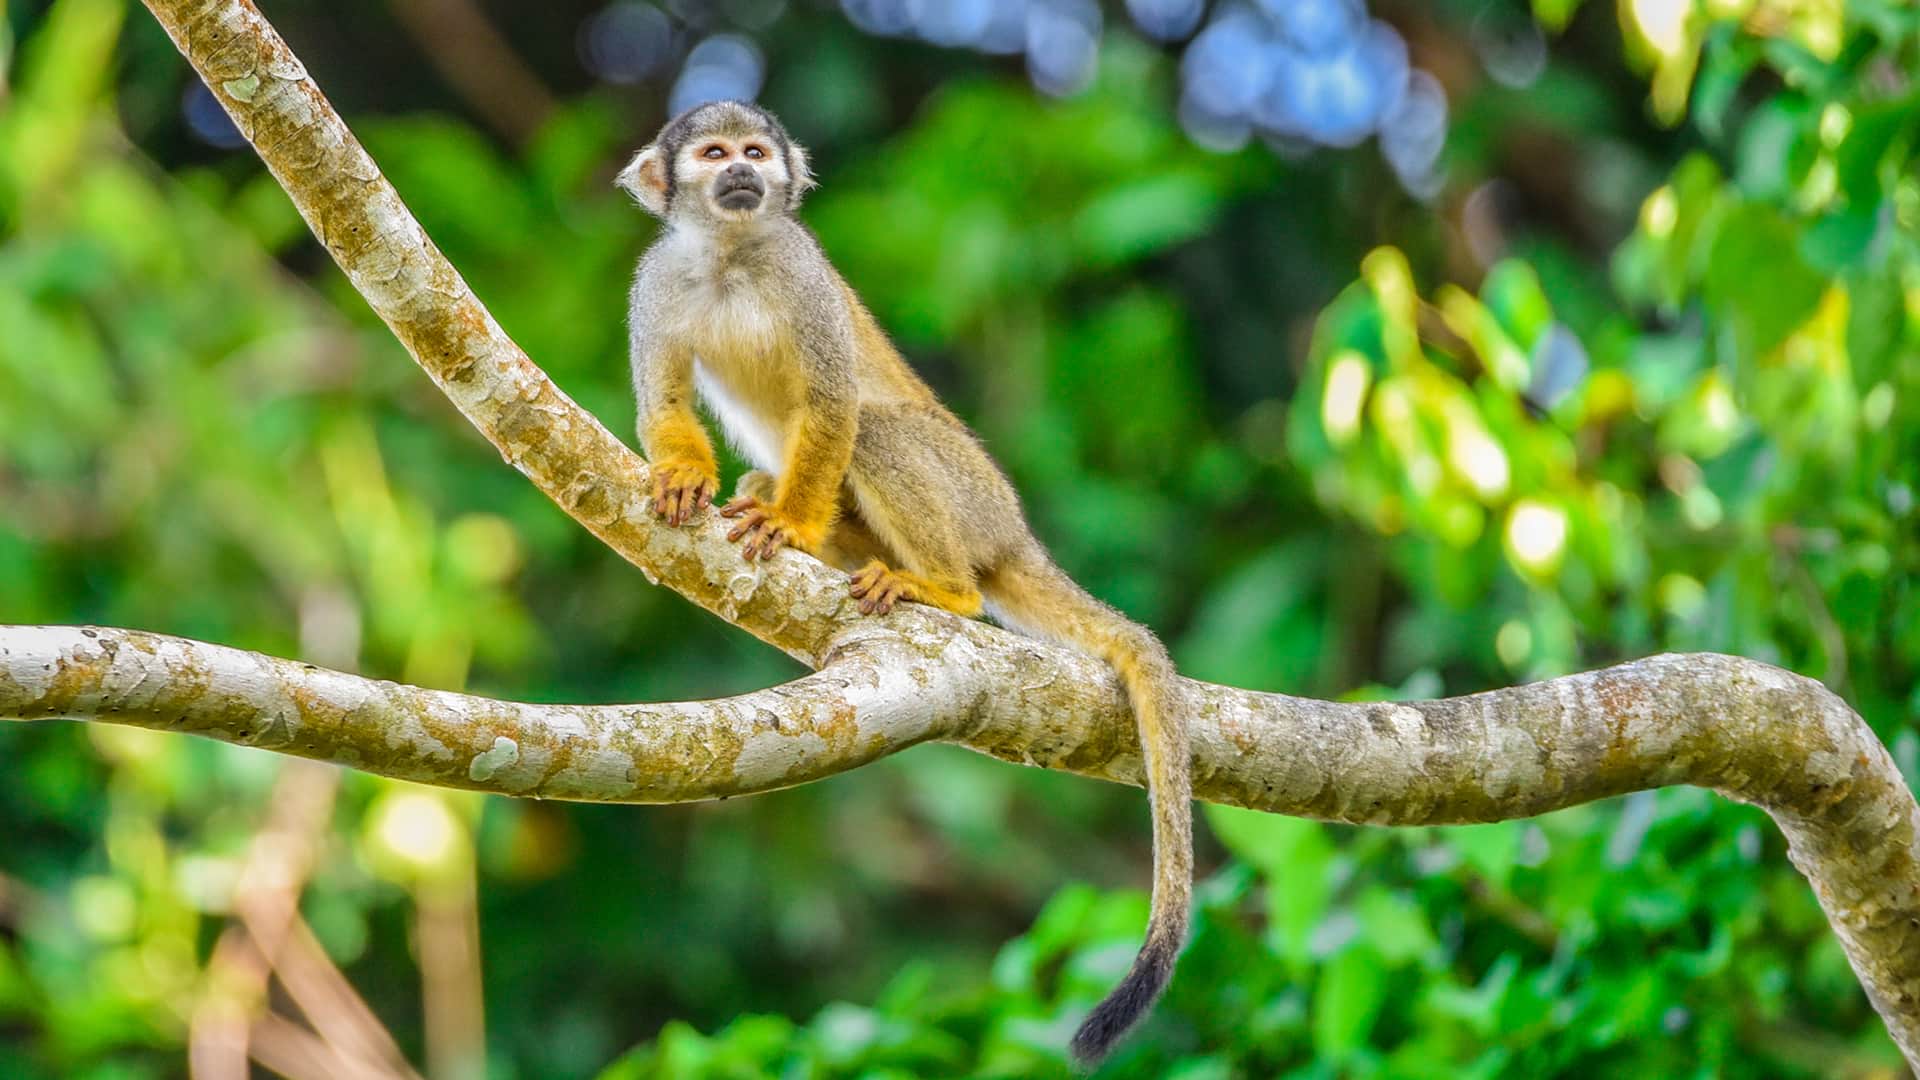 11A squirrel monkey standing in a branch | Responsible Travel Peru